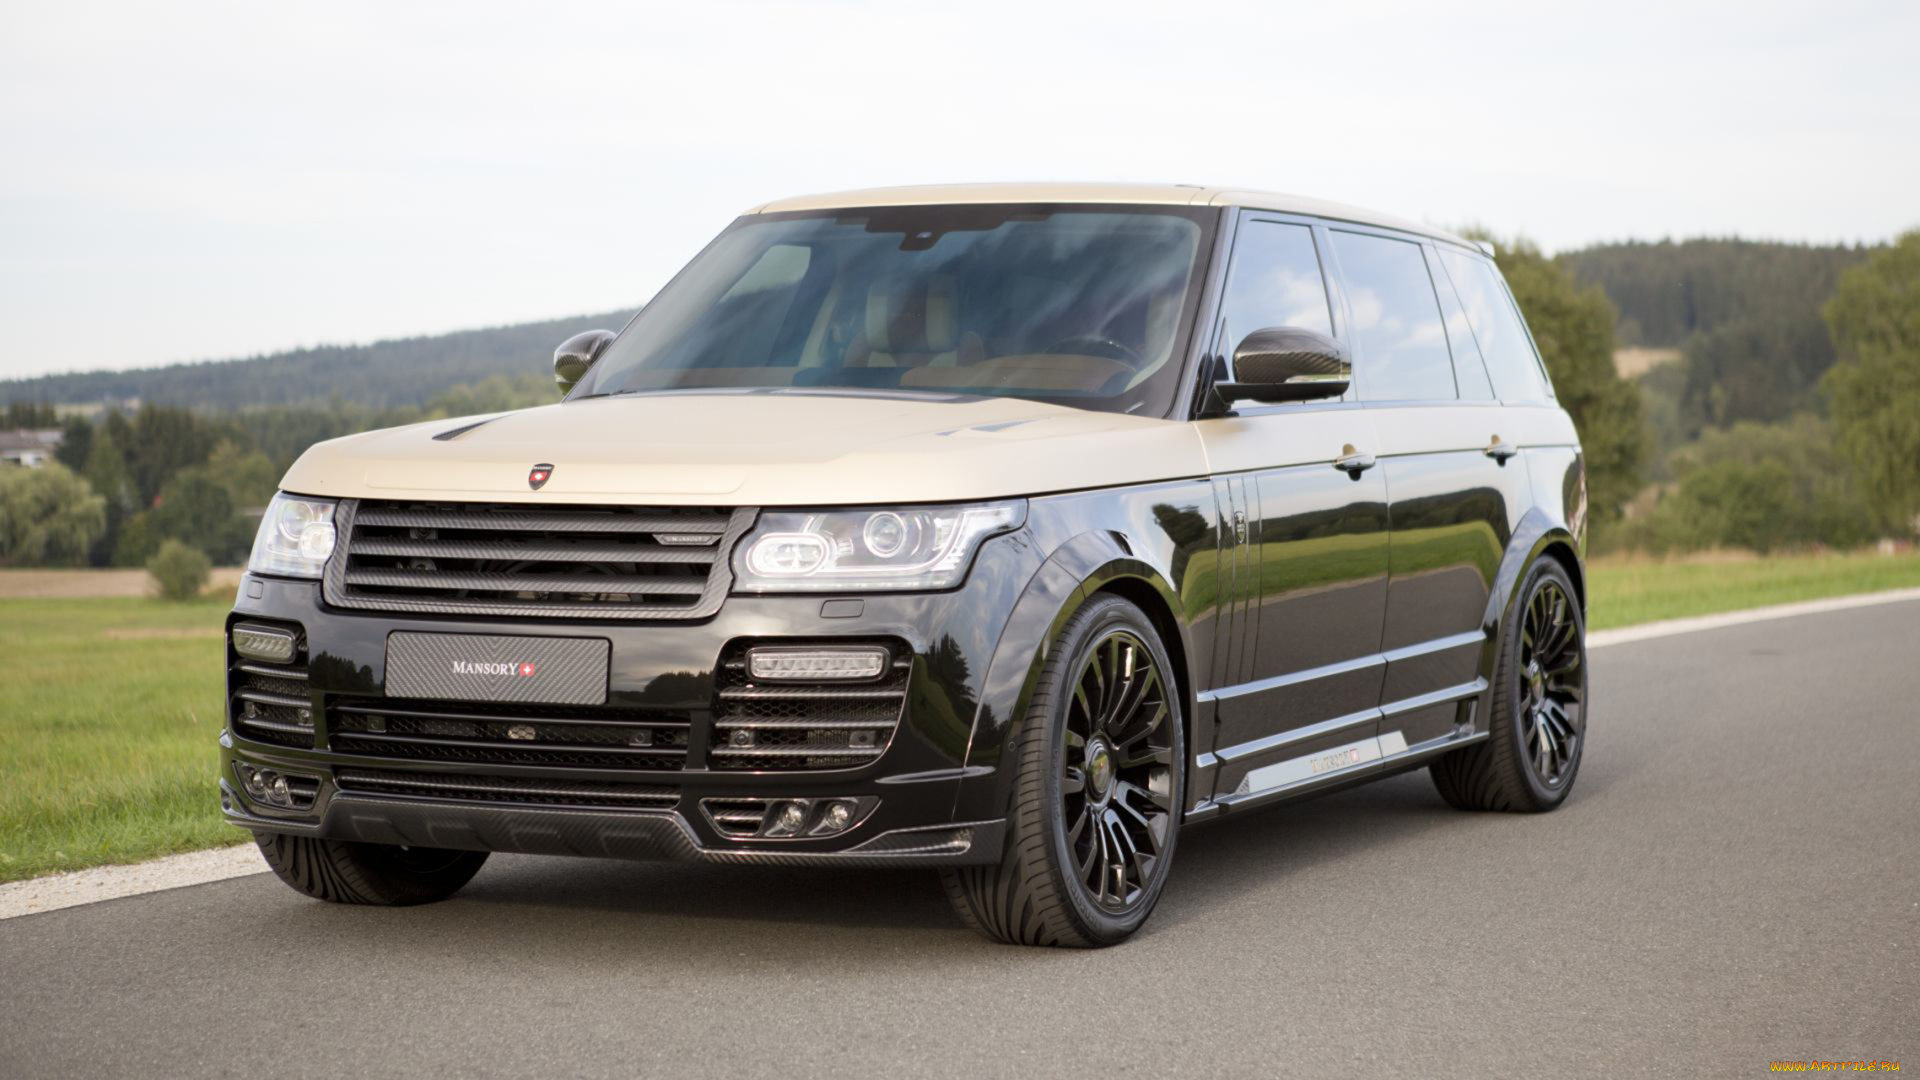 mansory, range, rover, autobiography, extended, 2016, автомобили, range, rover, 2016, extended, range, rover, mansory, autobiography